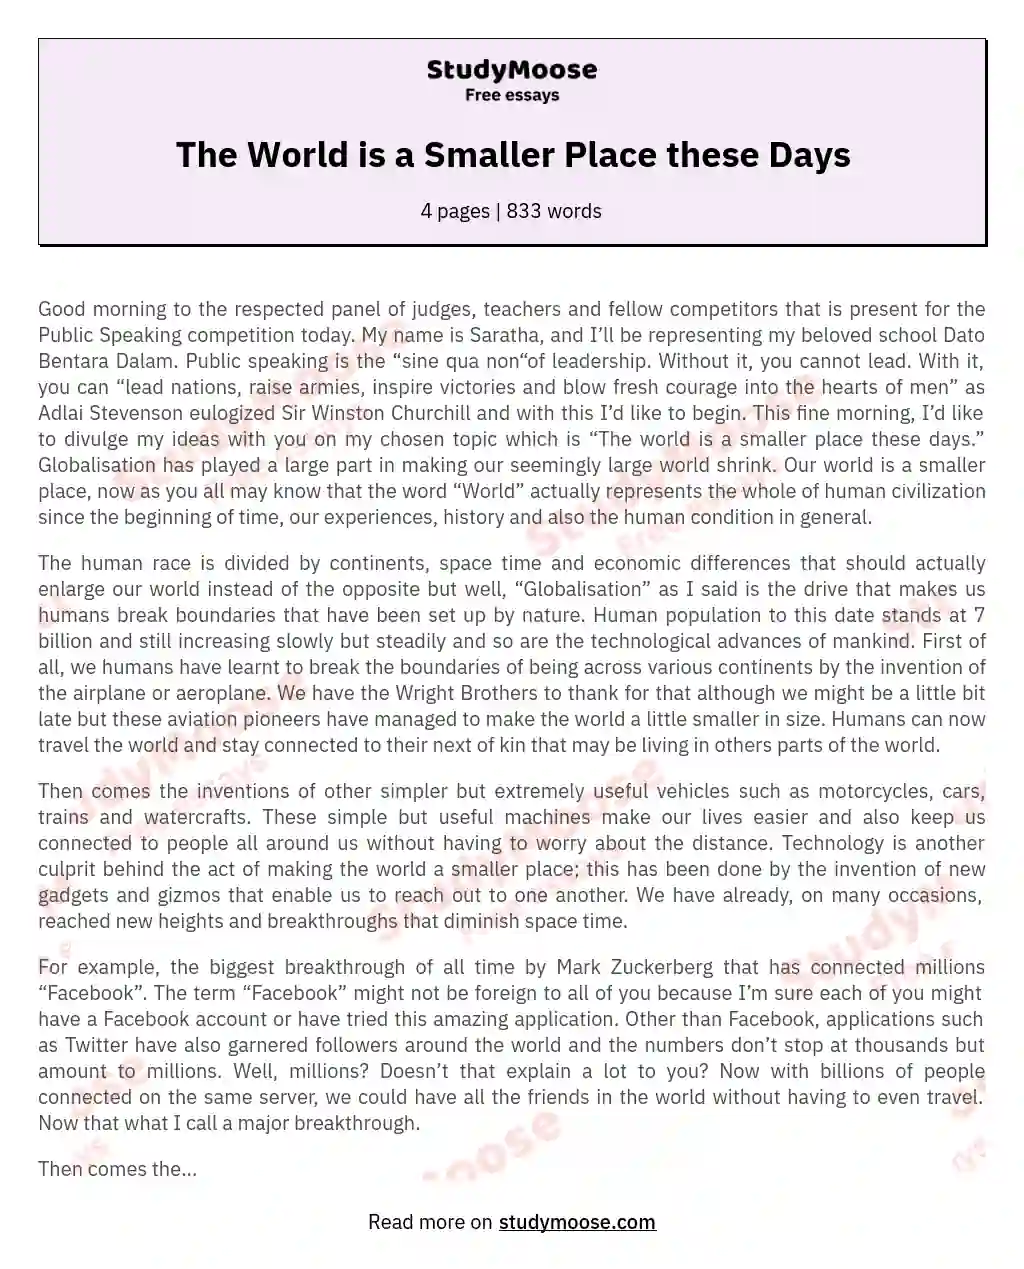 The World is a Smaller Place these Days essay